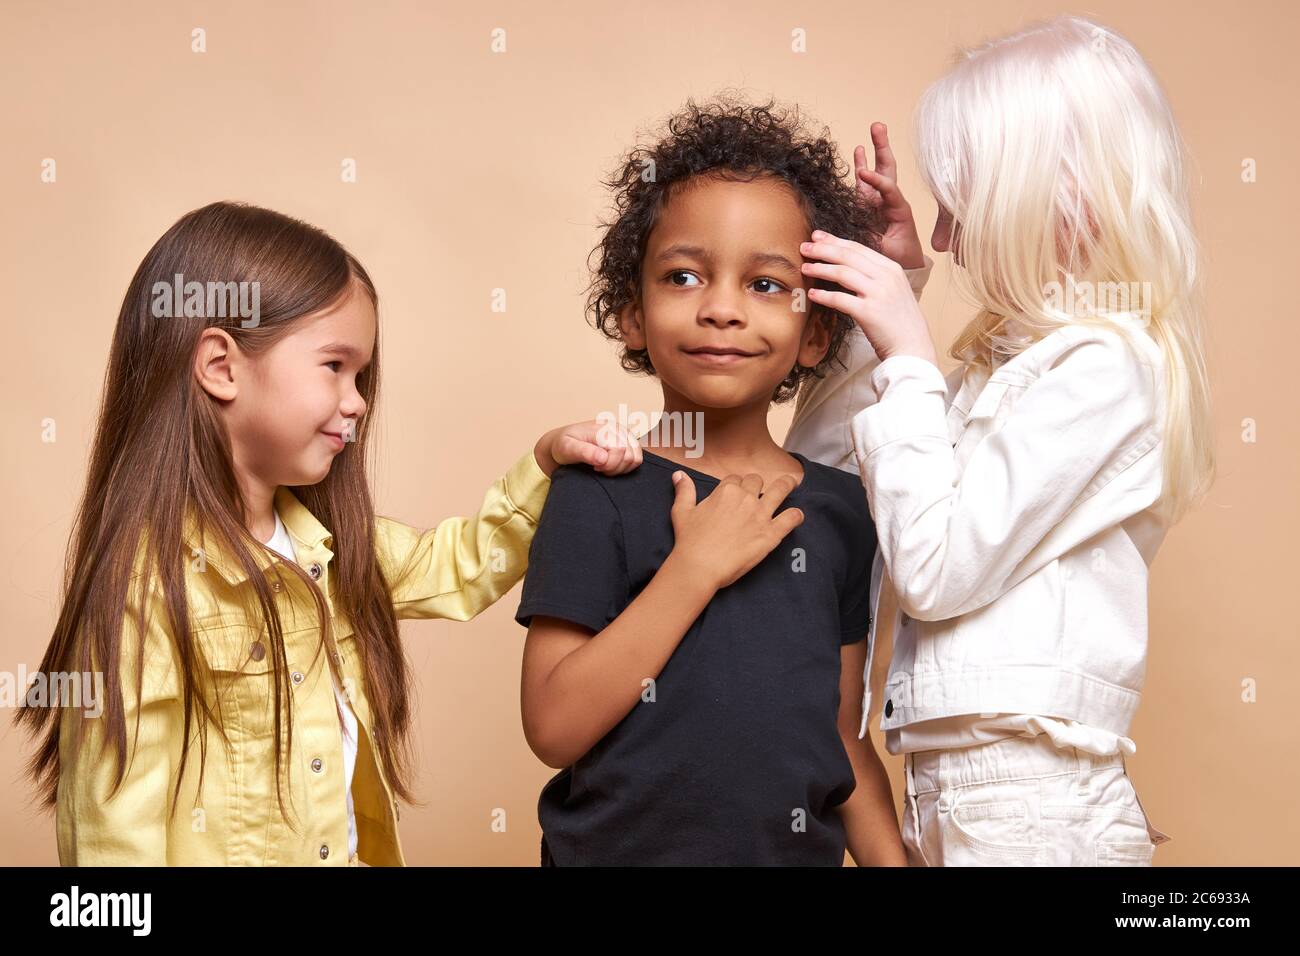 sweet kid girls play with dark-skinned boy, they like him. portrait of diverse children standing together Stock Photo